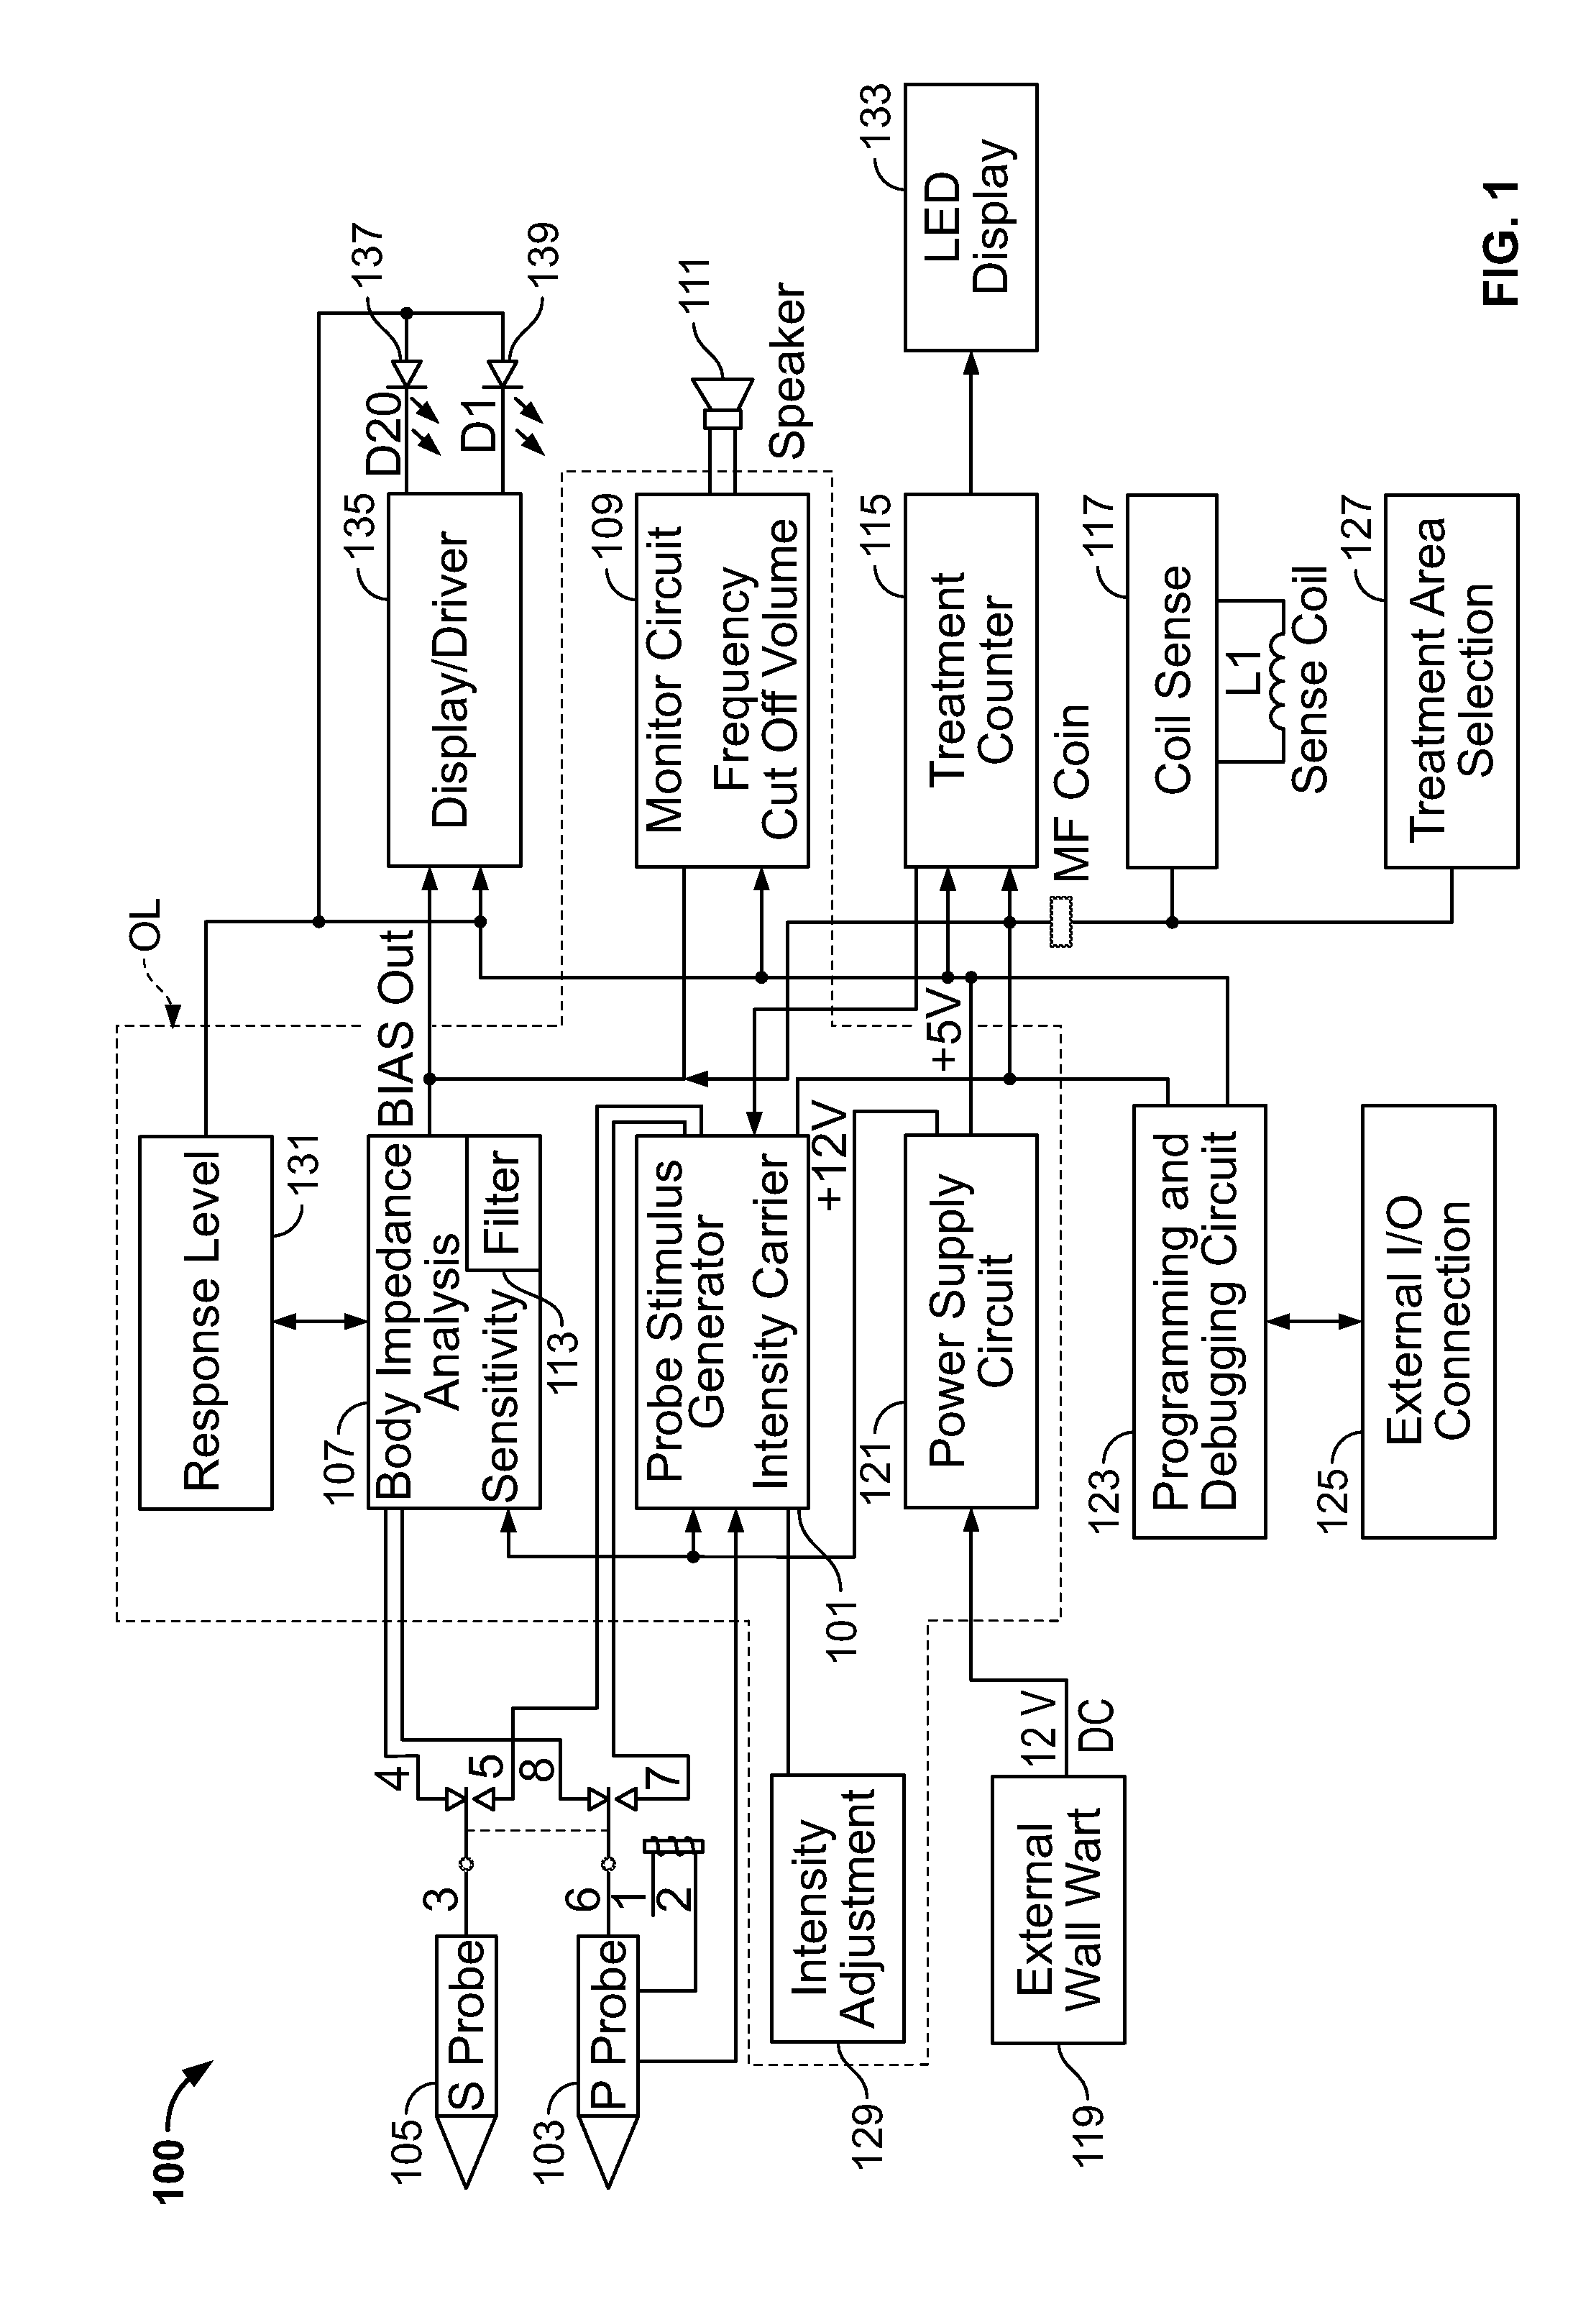 Spherical vibrating probe apparatus and method for conducting efficacy analysis of pain treatment using probe apparatus